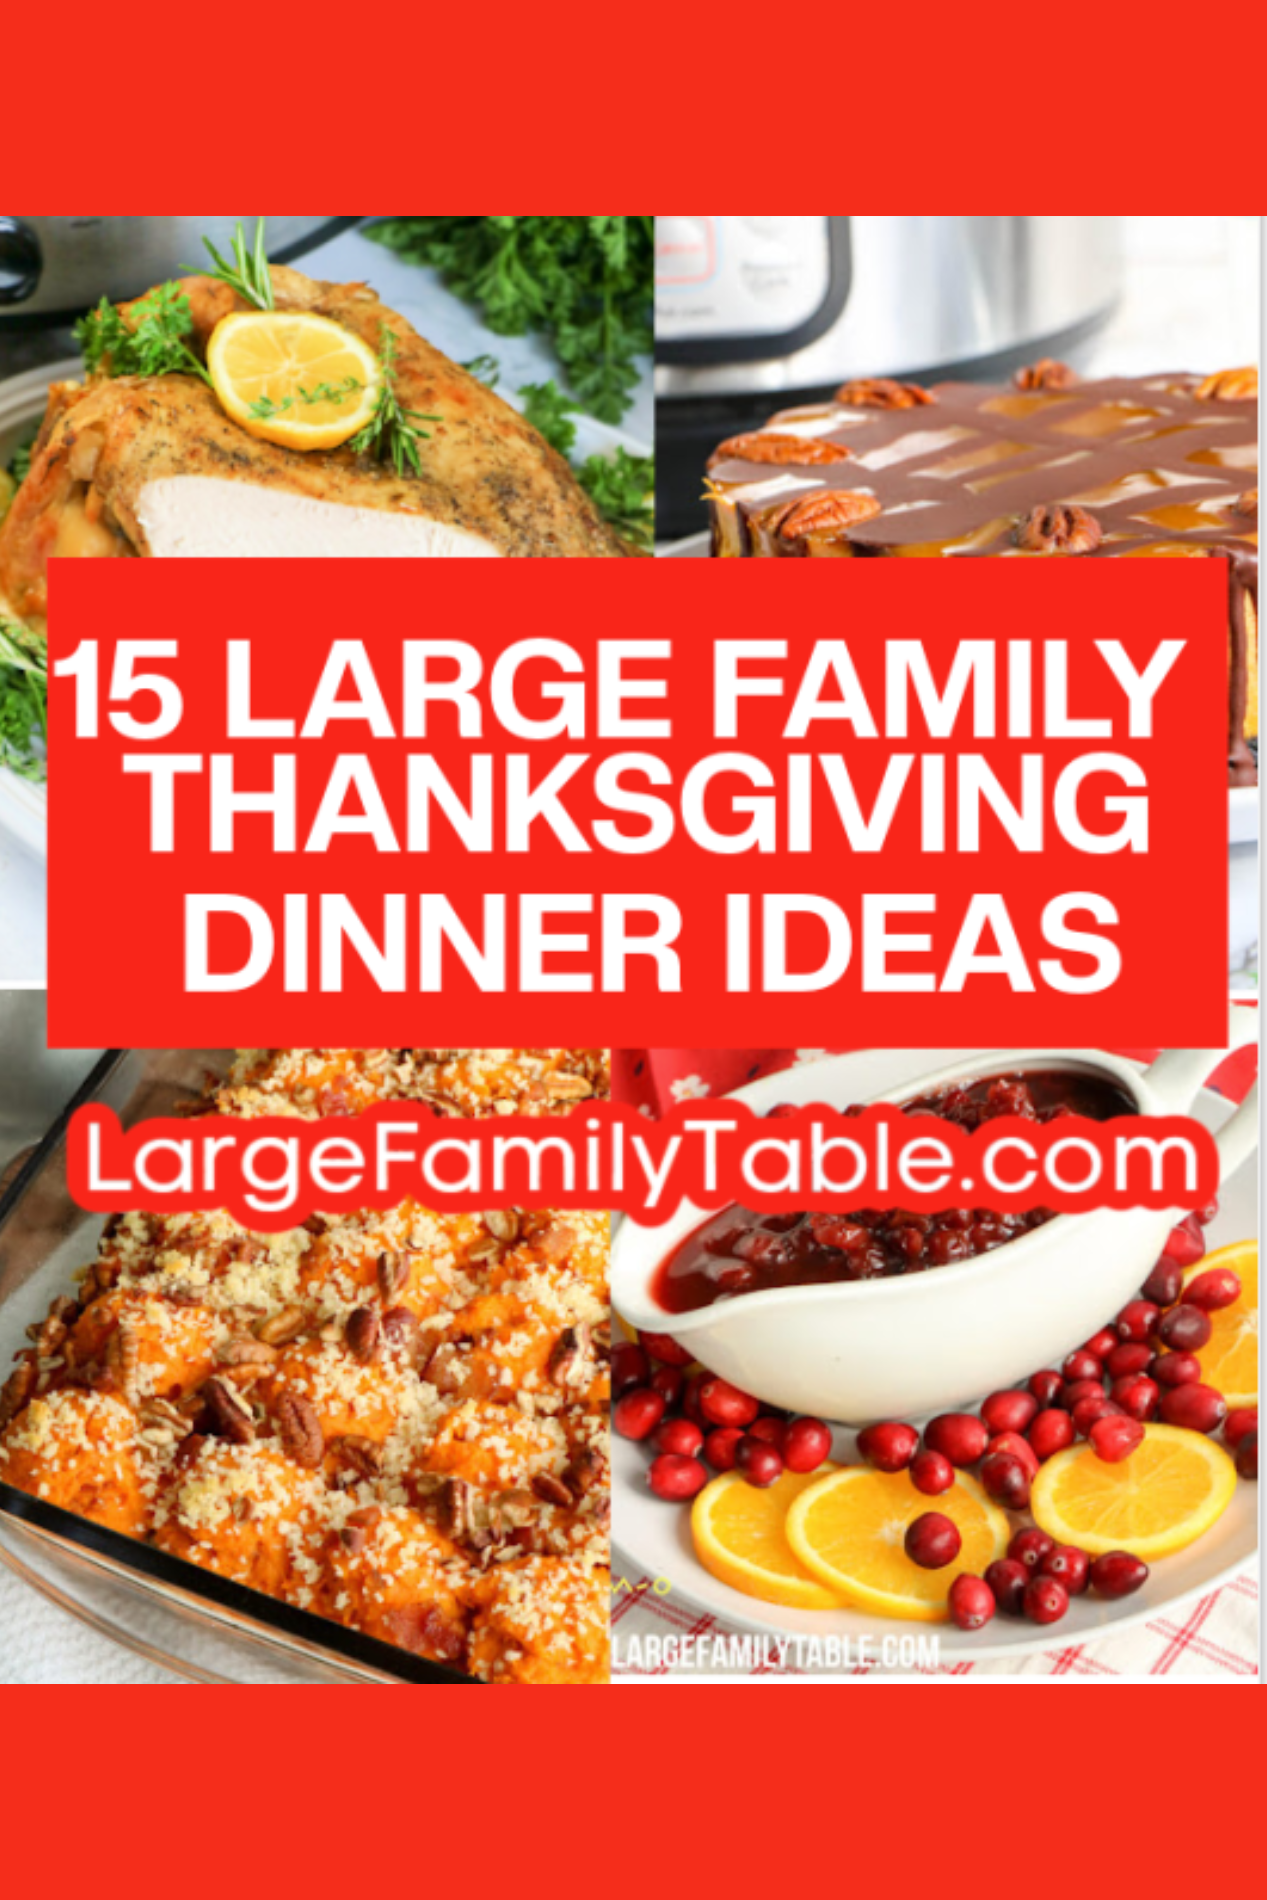 15 large family thanksgiving ideas